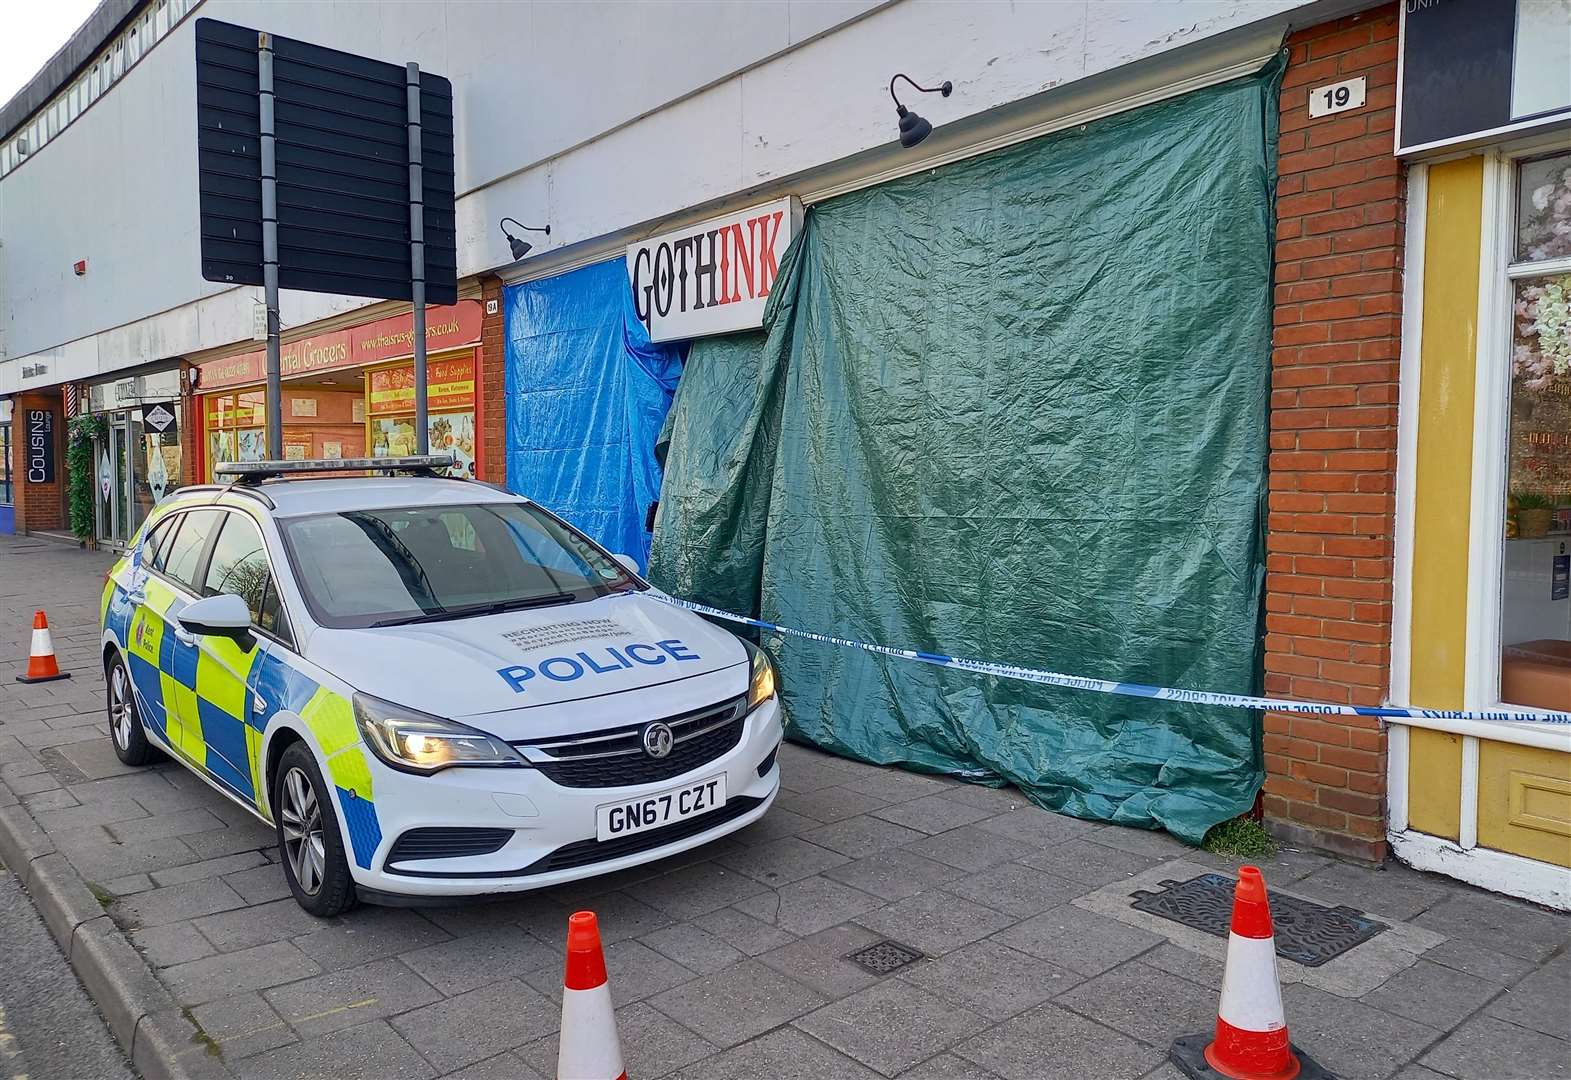 GothInk Studio in Lower Bridge Street was screened by tarpaulins following the incident